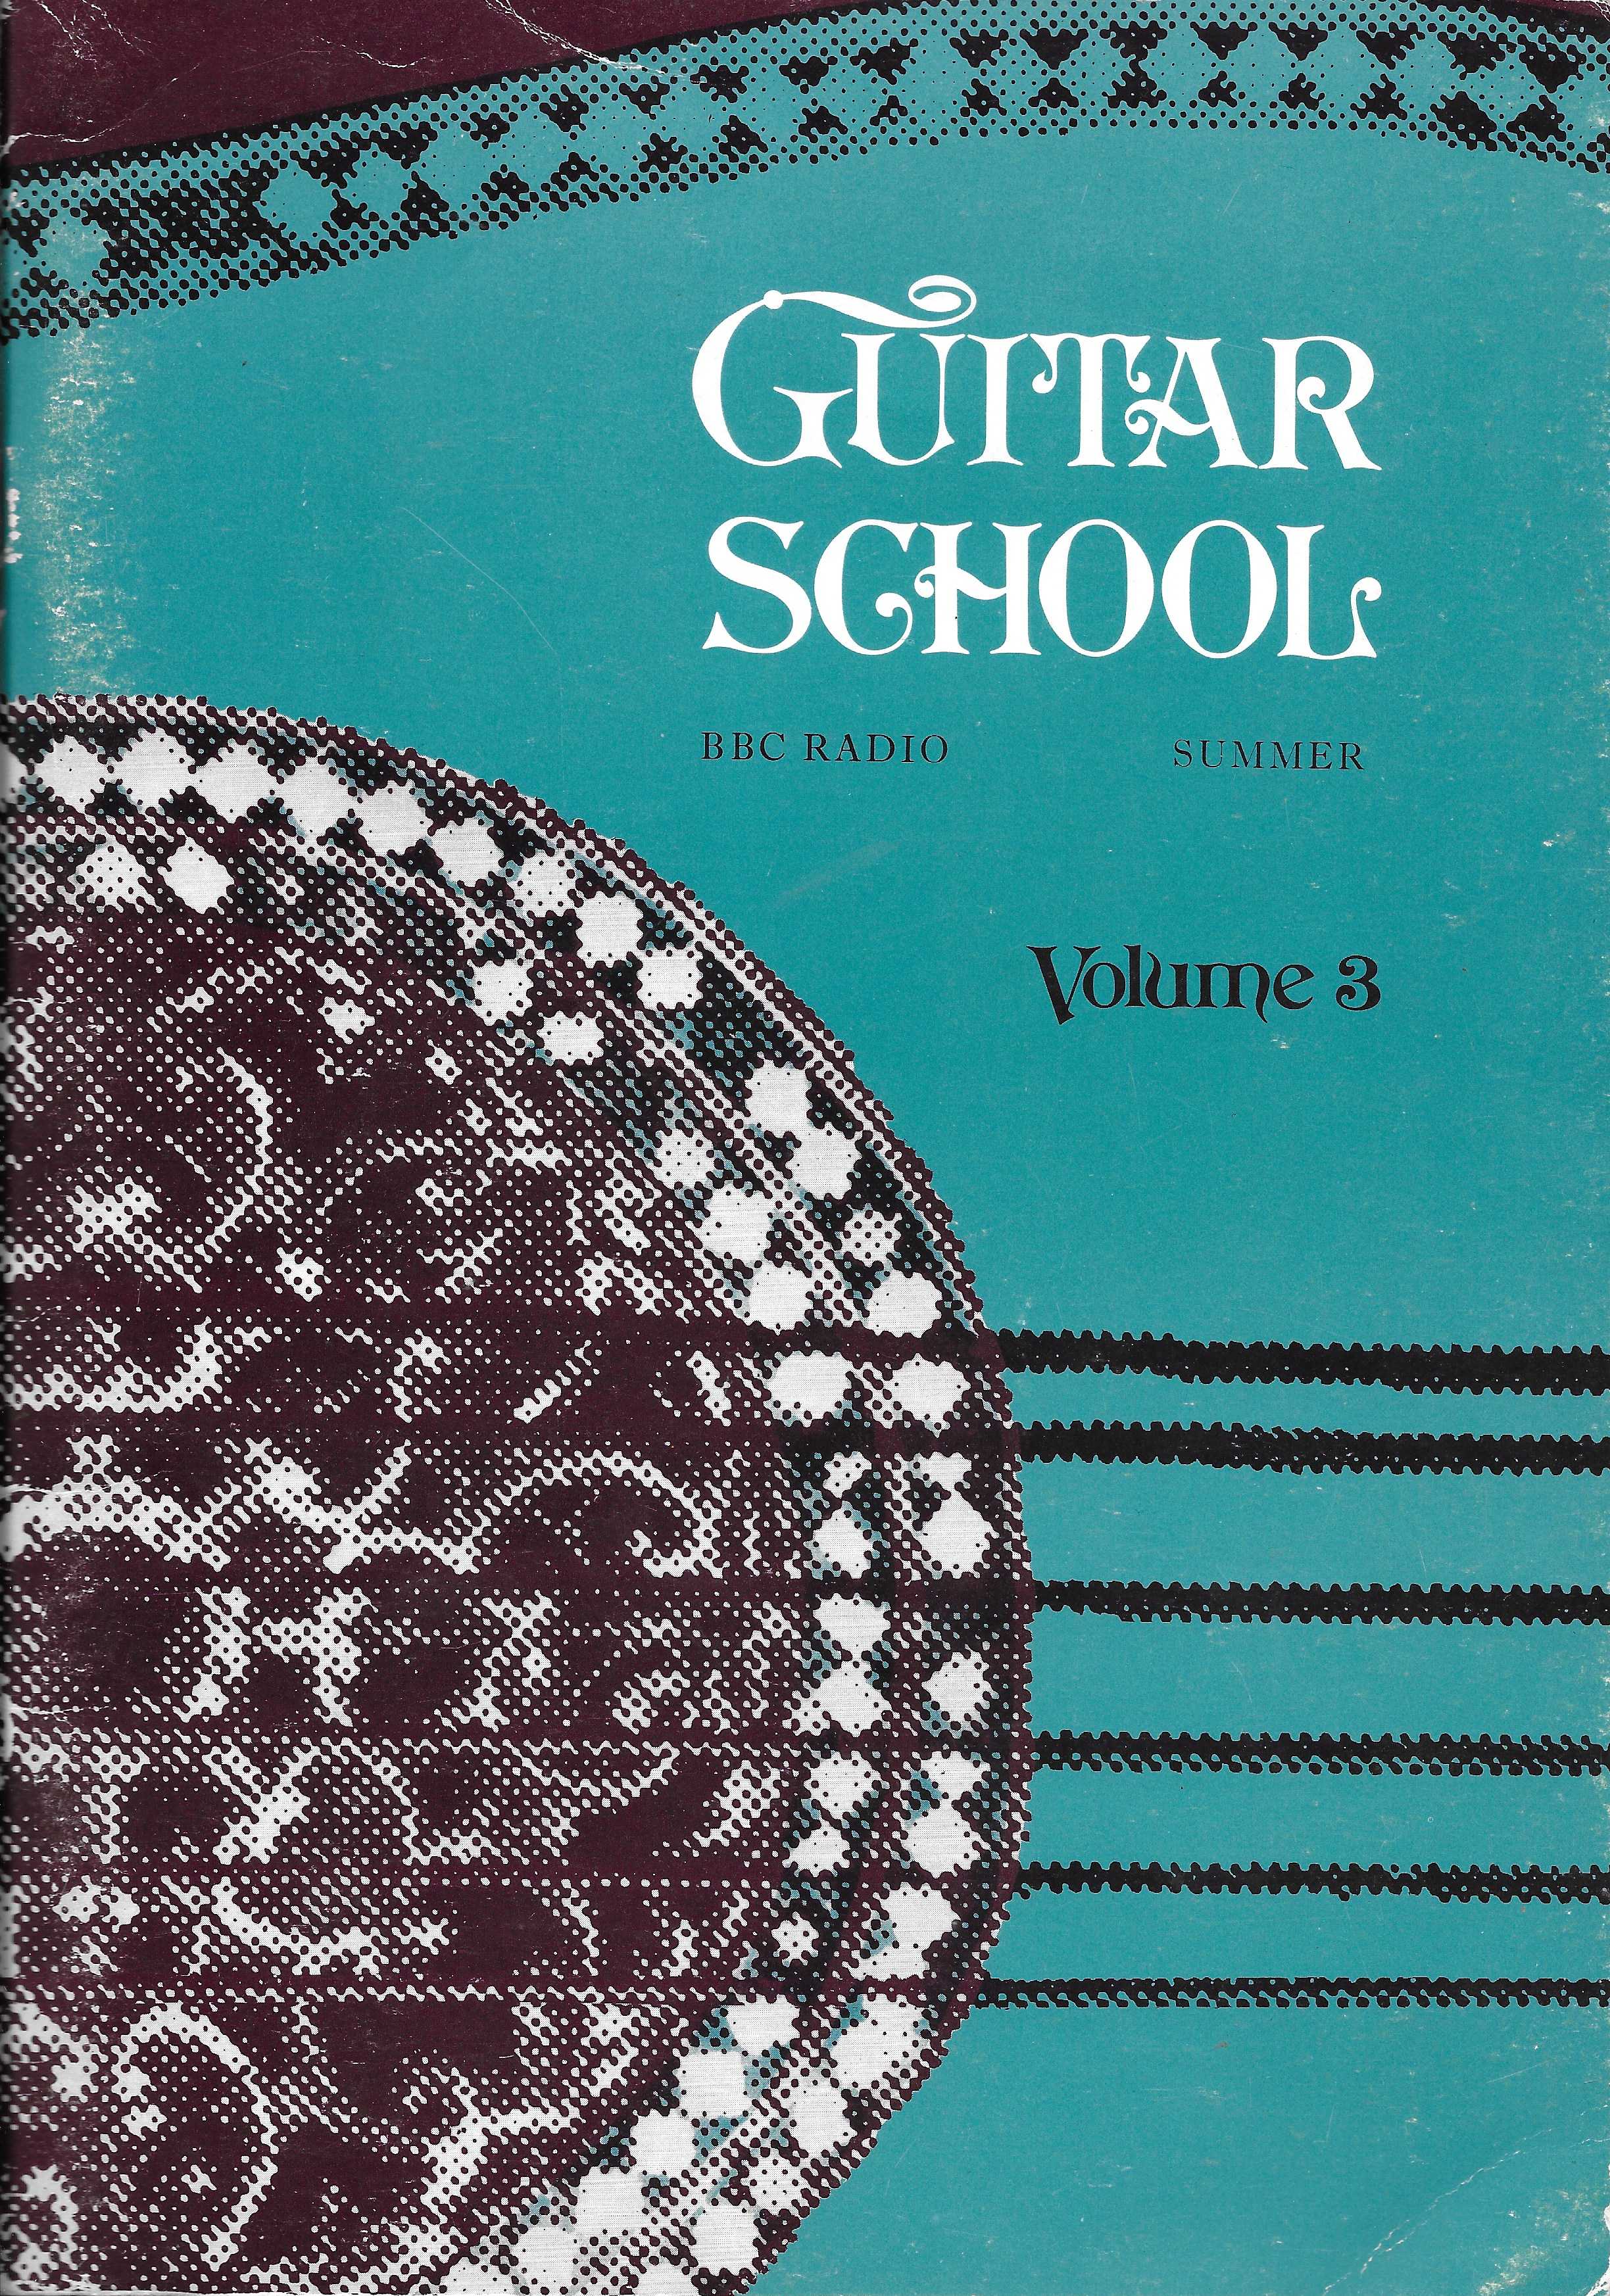 Picture of ISBN 0 563 11397 9 Guitar school - Volume 3 by artist Various from the BBC books - Records and Tapes library